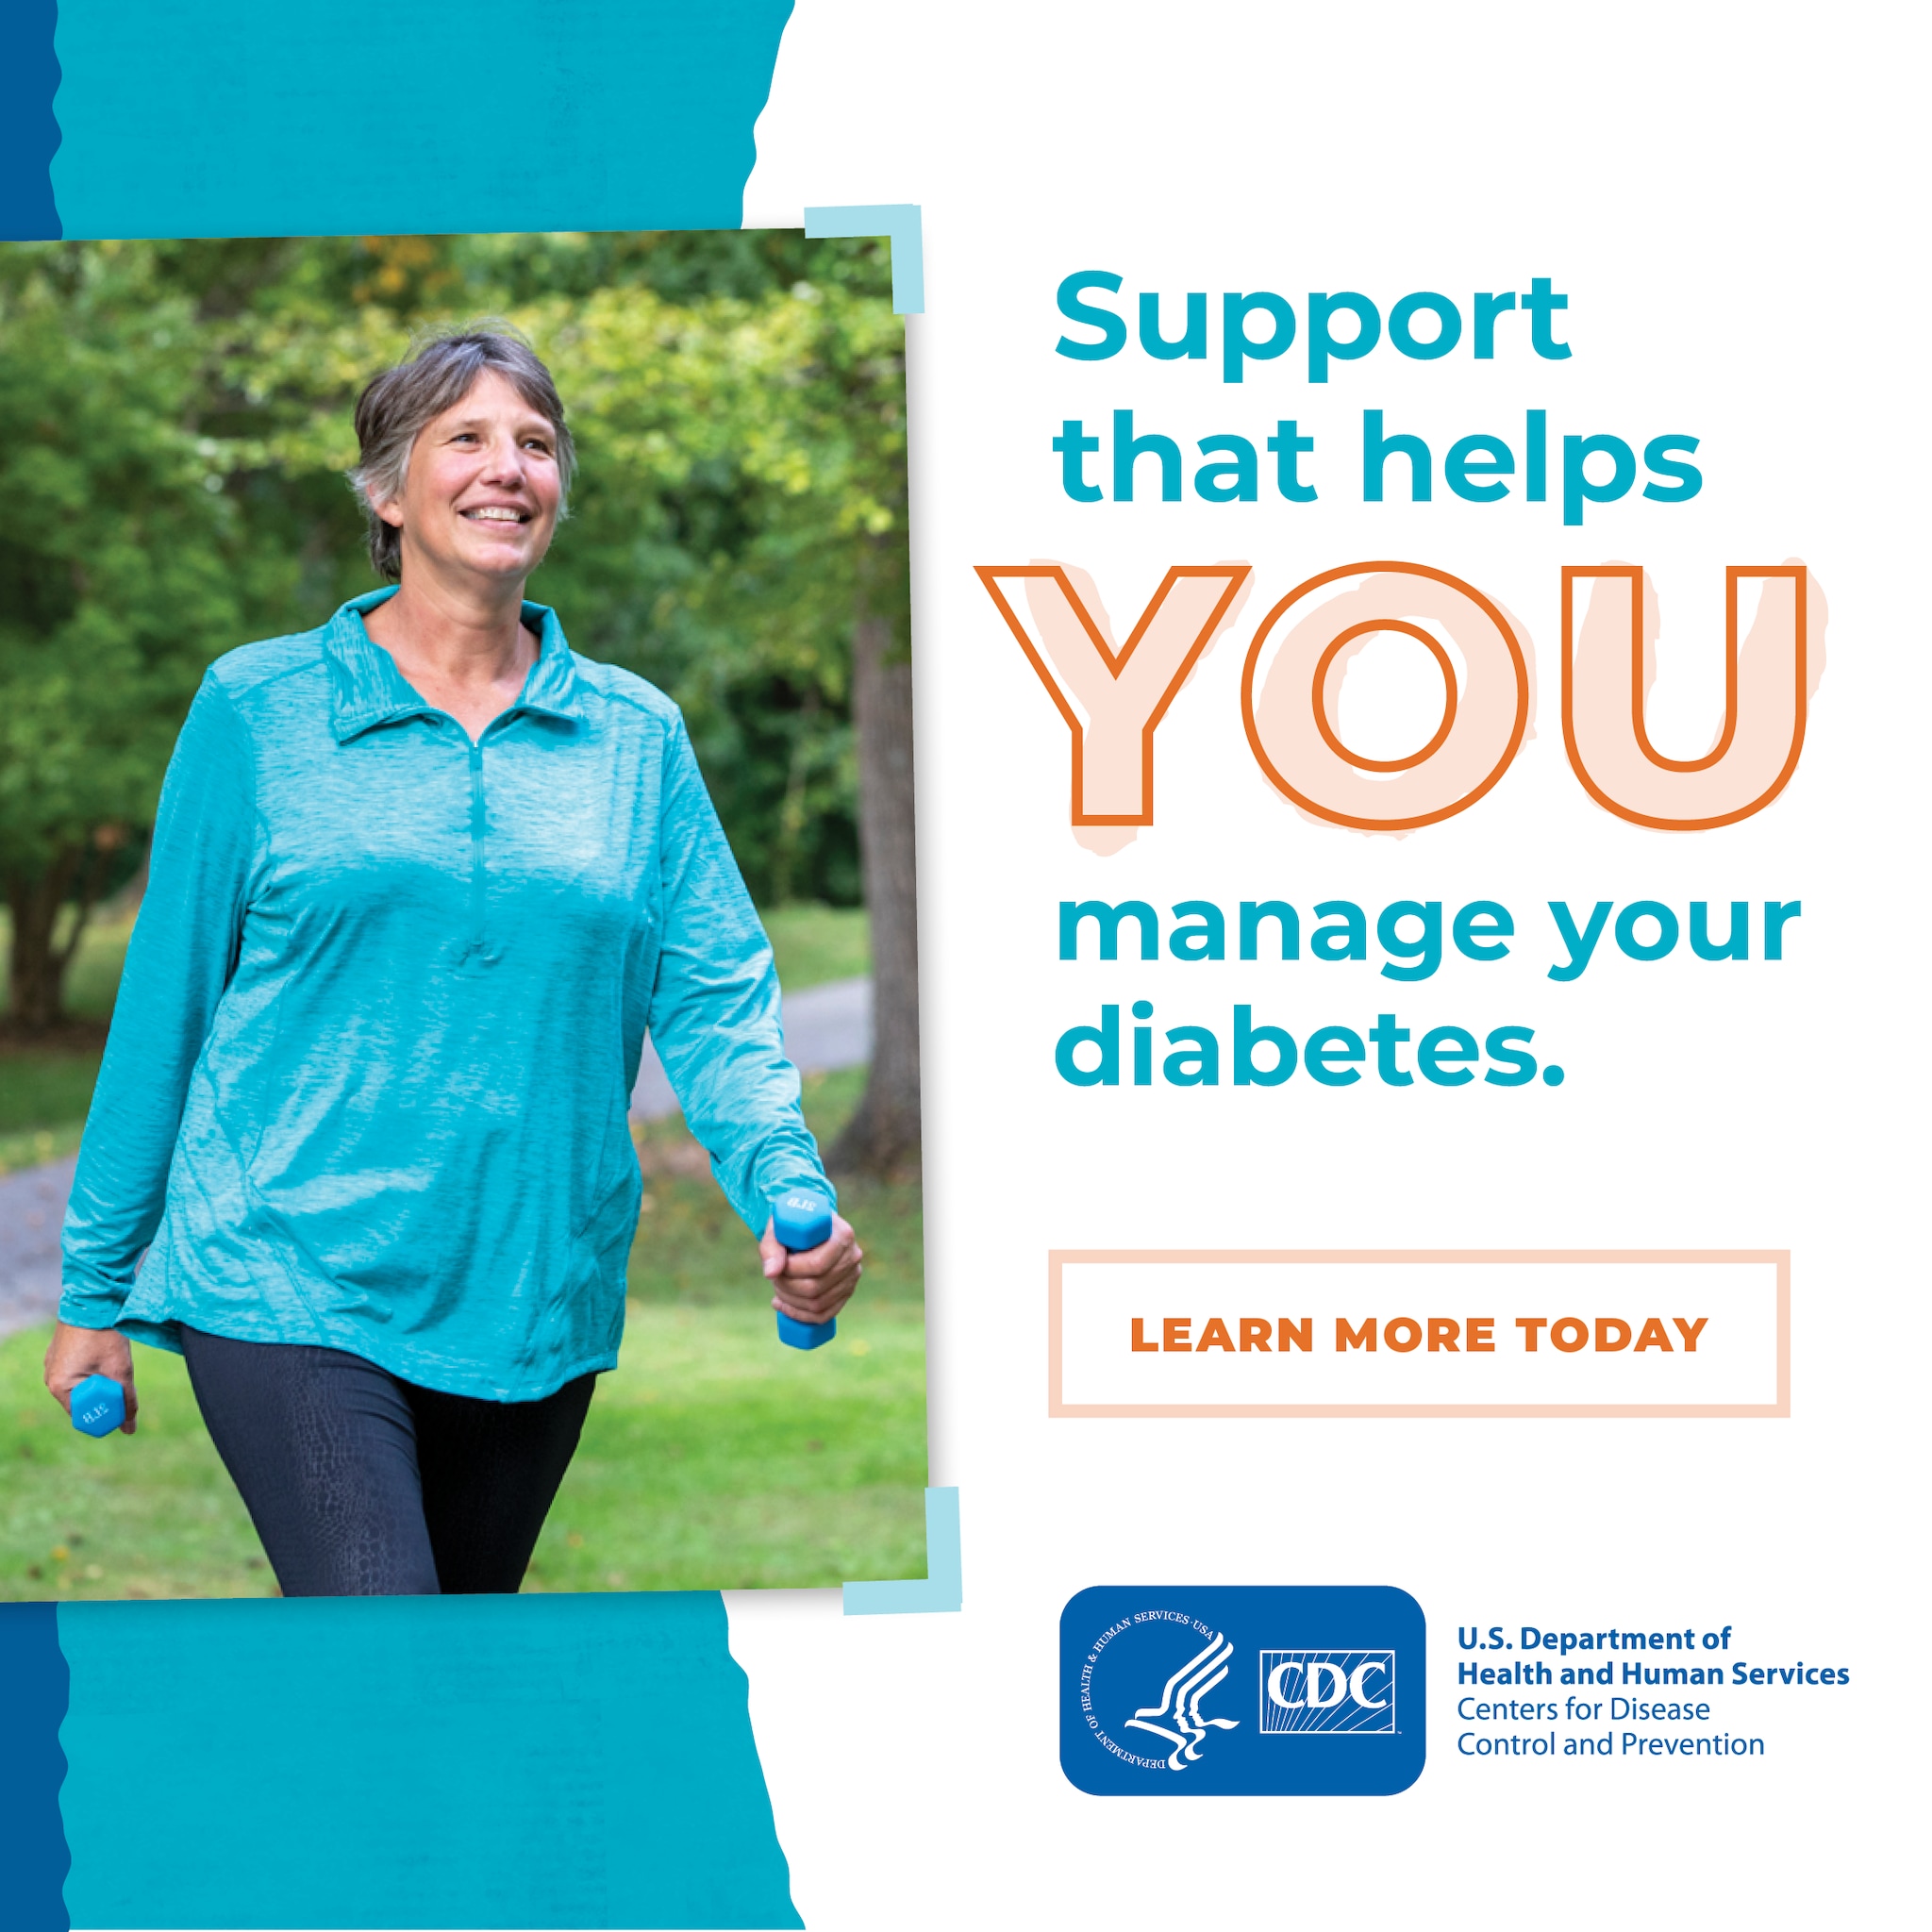 Support that helps you manage diabetes. Learn more today.